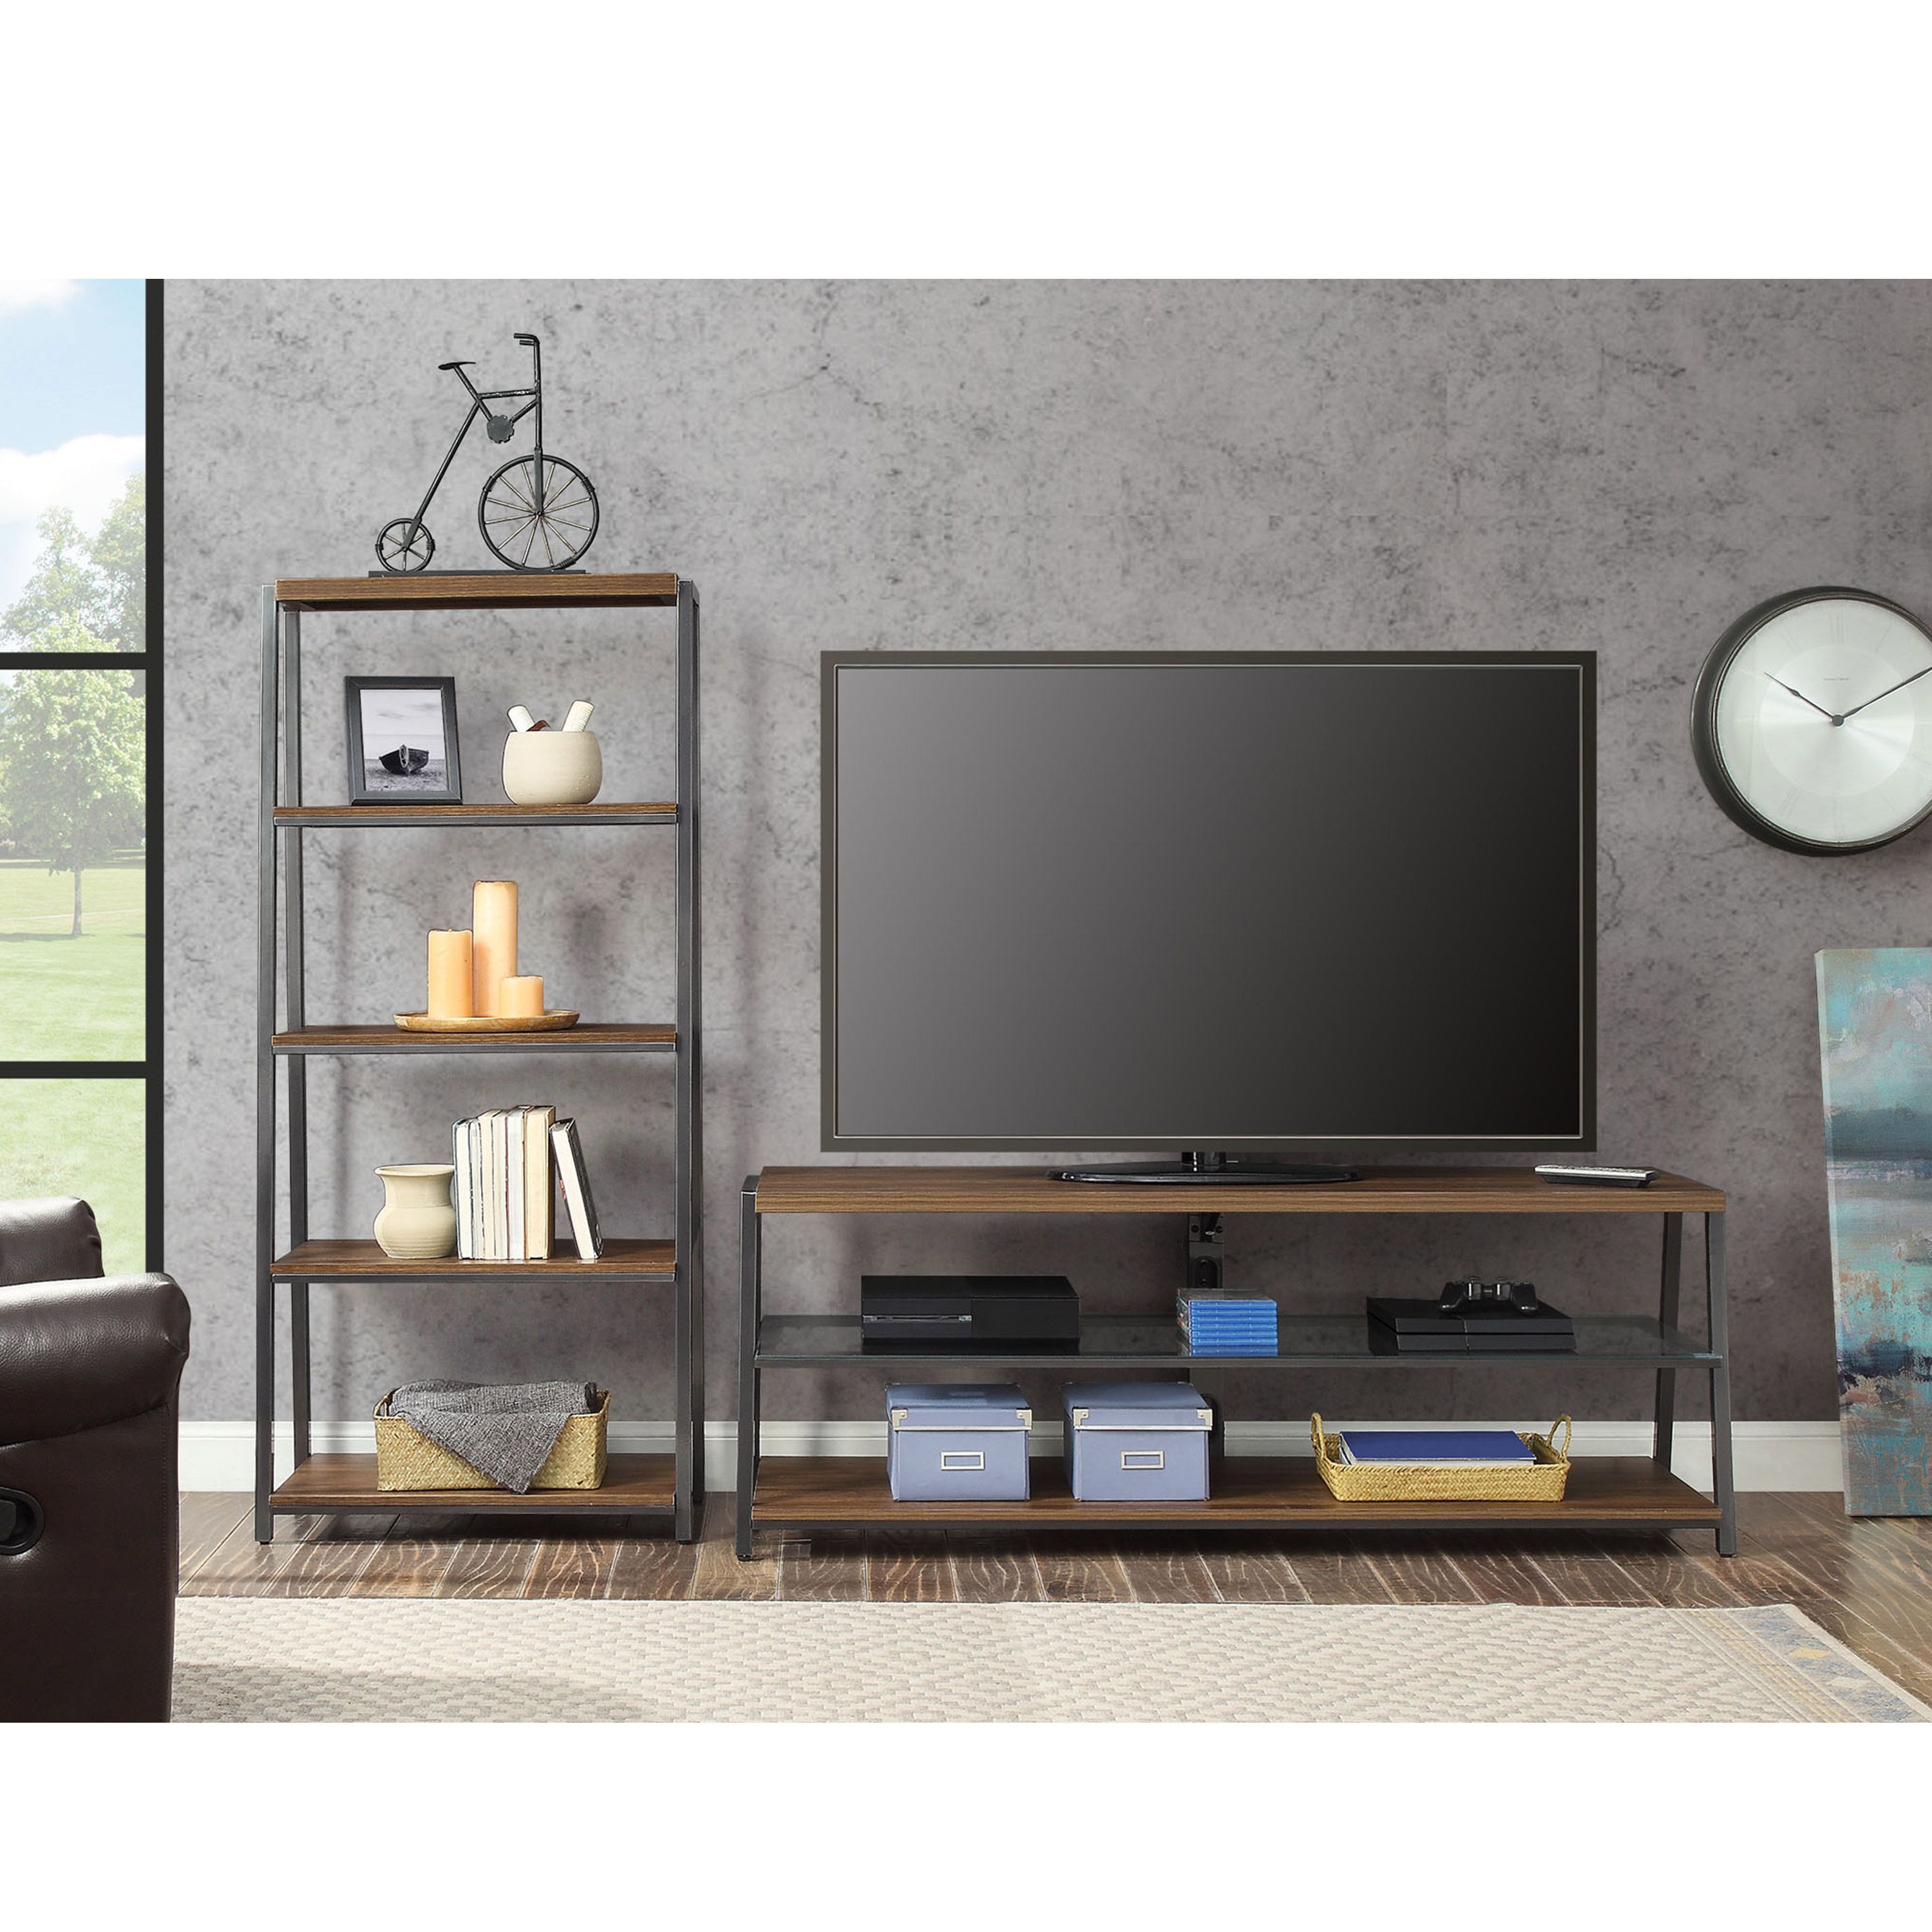 Mainstays Arris 3 In 1 Tv Stand For Televisions Up To 70", Perfect Intended For Canyon 74 Inch Tv Stands (View 11 of 30)